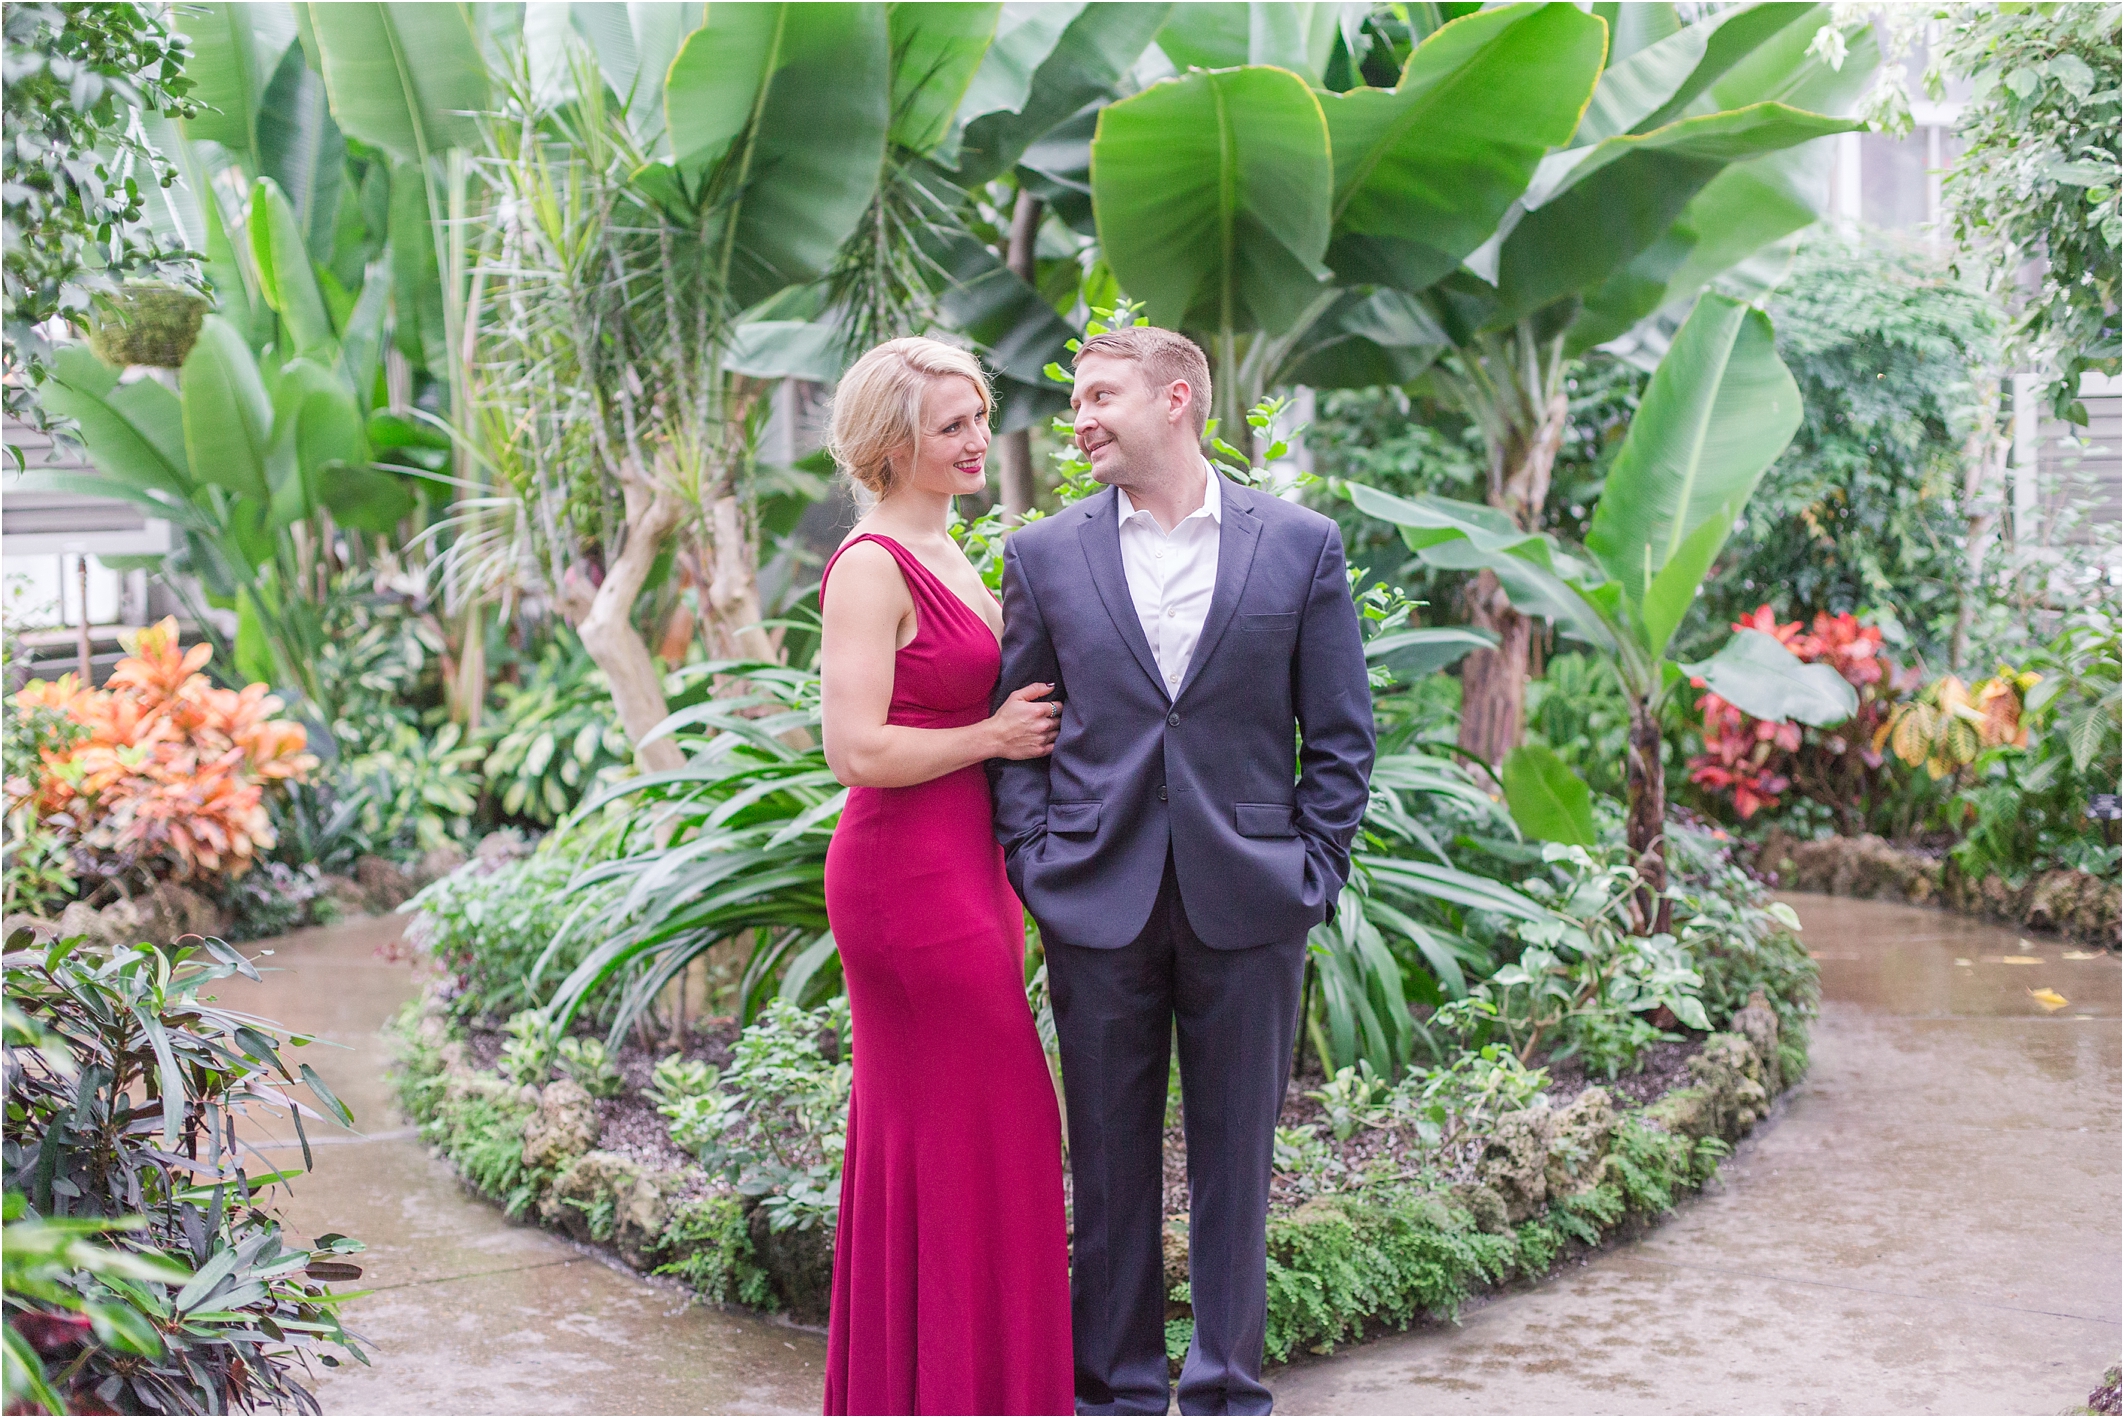 elegant-classic-belle-isle-conservatory-engagement-photos-in-detroit-mi-by-courtney-carolyn-photography_0018.jpg